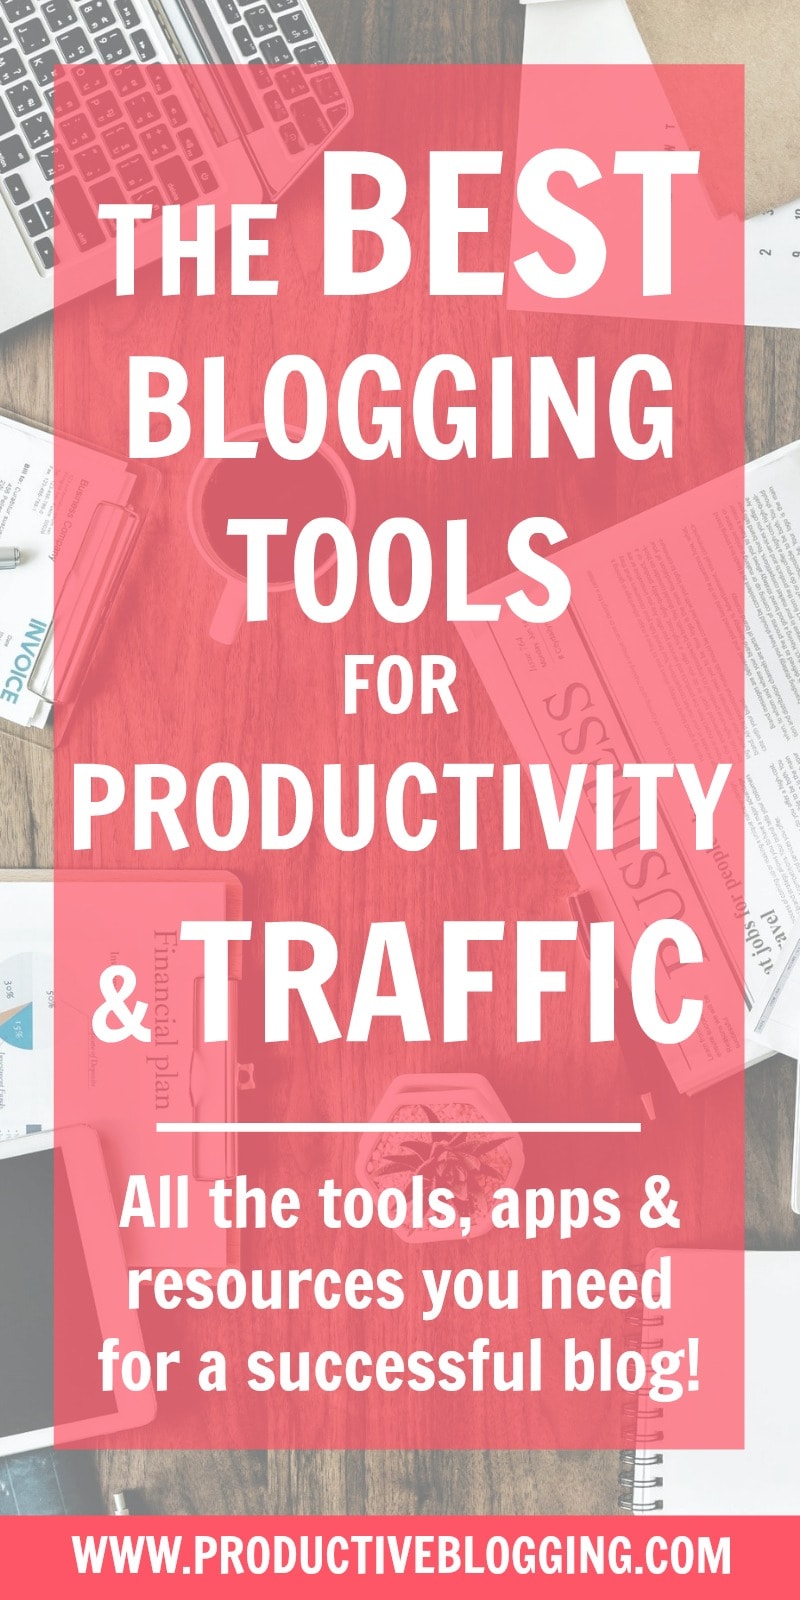 One of the trickiest aspects of blogging is choosing which tools, resources and apps to use to help grow your blog. The choice is bewildering. I believe less is more when it comes to blogging tools. These are the resources I actually use and what I consider to be the best blogging tools to increase your productivity and traffic. #blogging #bloggingtools #toolsofthetrade #growyourblog #bloggrowth #bloggrowthhacks #productiveblogging #timemanagement #efficiency #organised #organized #productivity #productivitytips #productivityhacks #productivityhabits #bloggingtips #blogginghacks #blogsmarter #blogsmarternotharder #BSNH